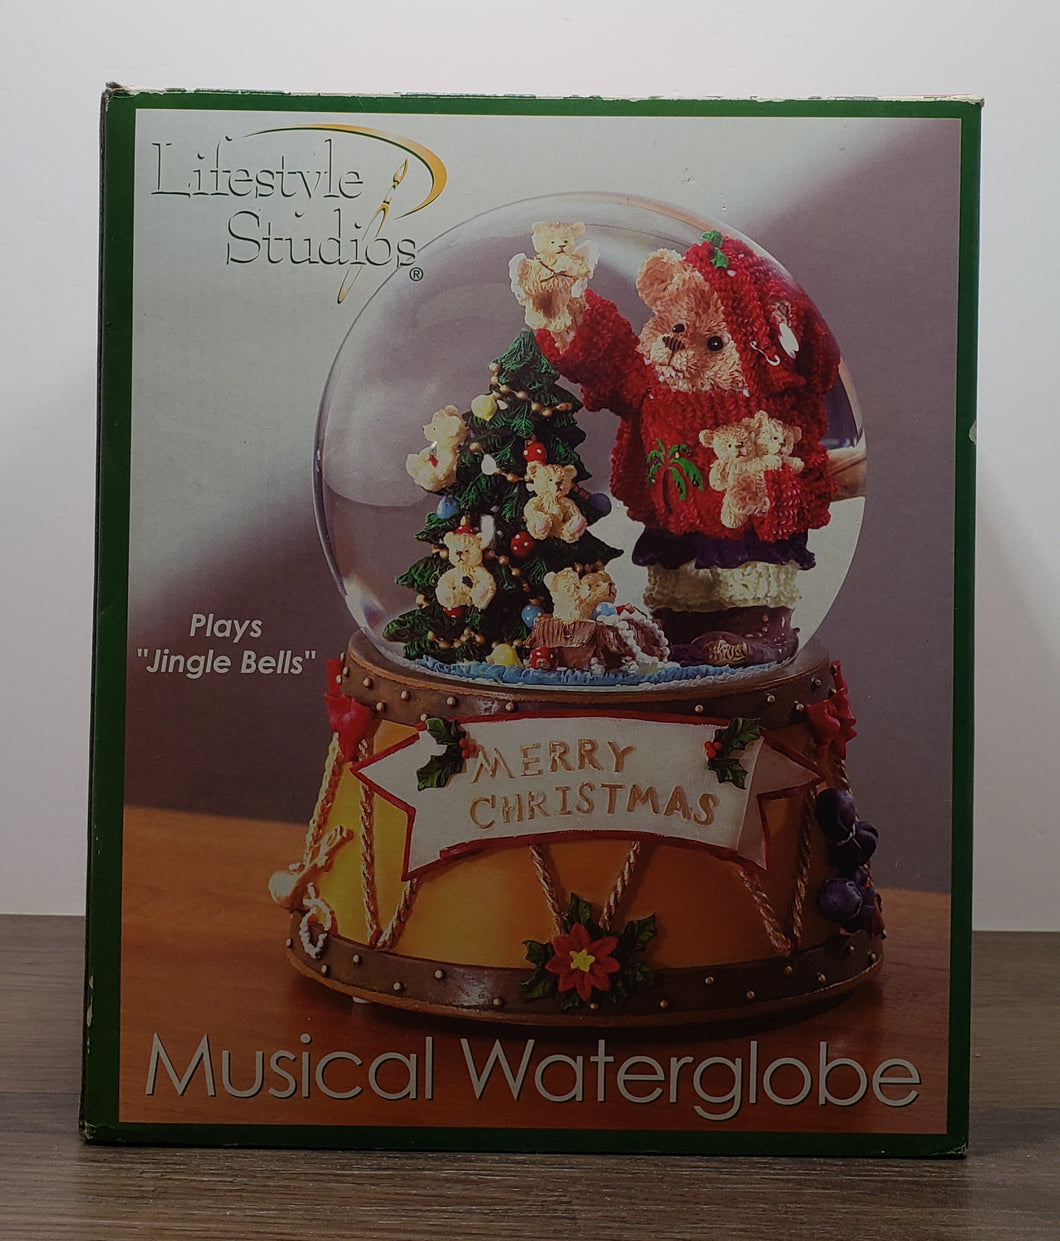 Lifestyle Studios Holiday Collection Musical Waterglobe Plays Silent Night